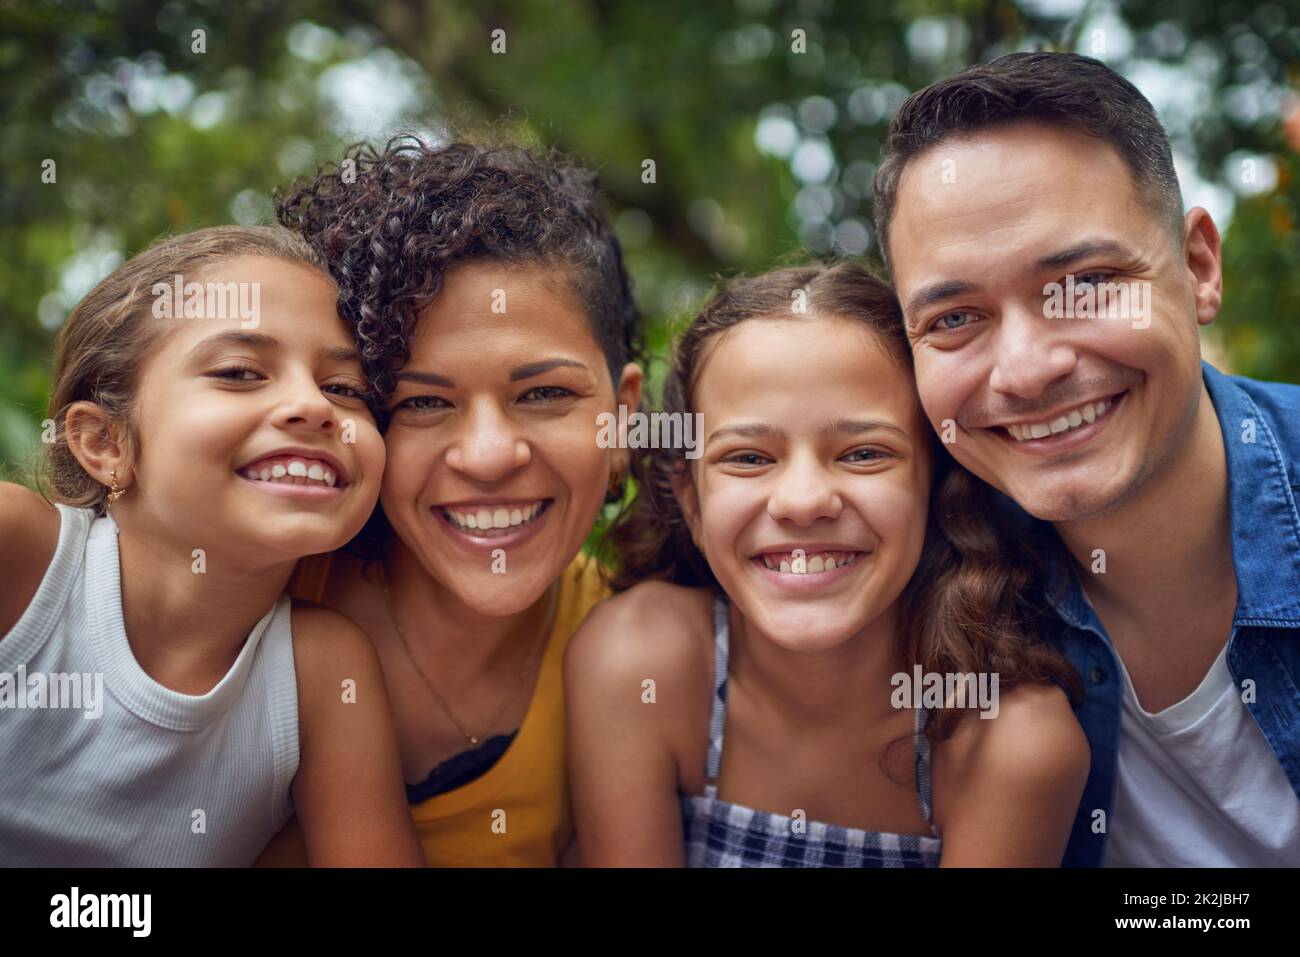 What a cute smile-filled family. Cropped portrait of a happy family spending some time together at the park. Stock Photo